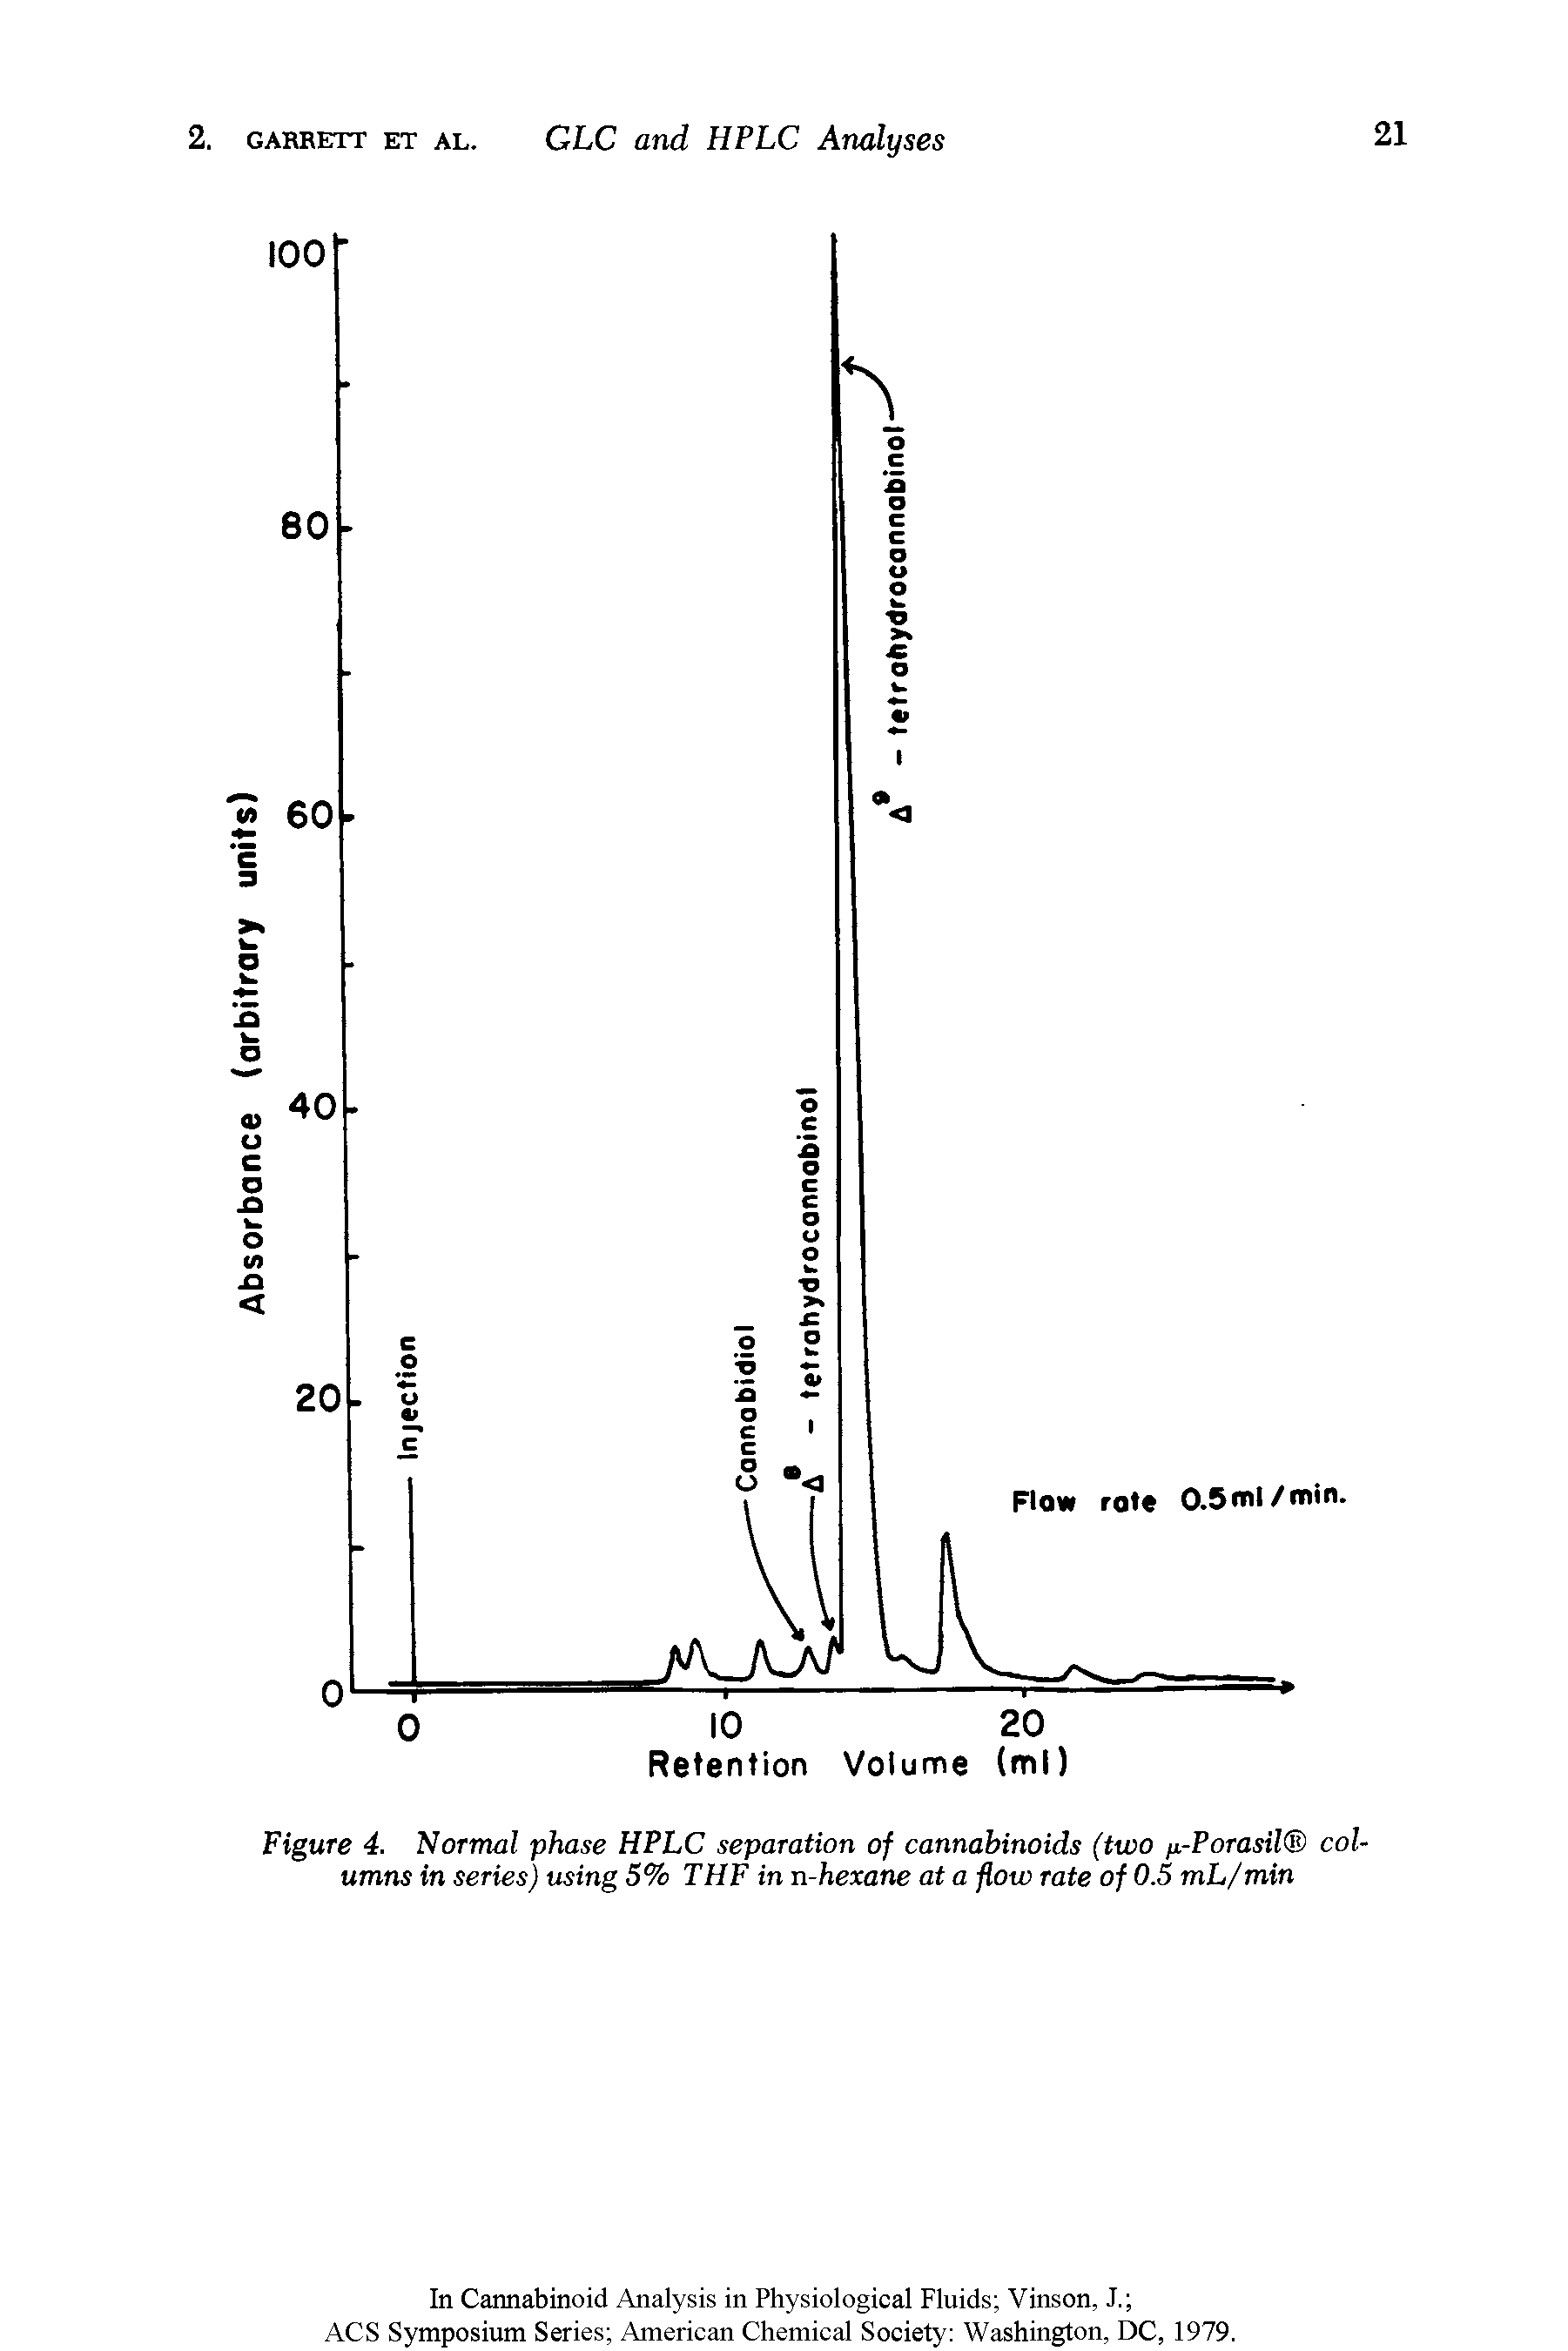 Figure 4. Normal phase HPLC separation of cannabinoids (two p-Porasil columns in series) using 5% THF in n-hexane at a flow rate of 0.5 mL/min...